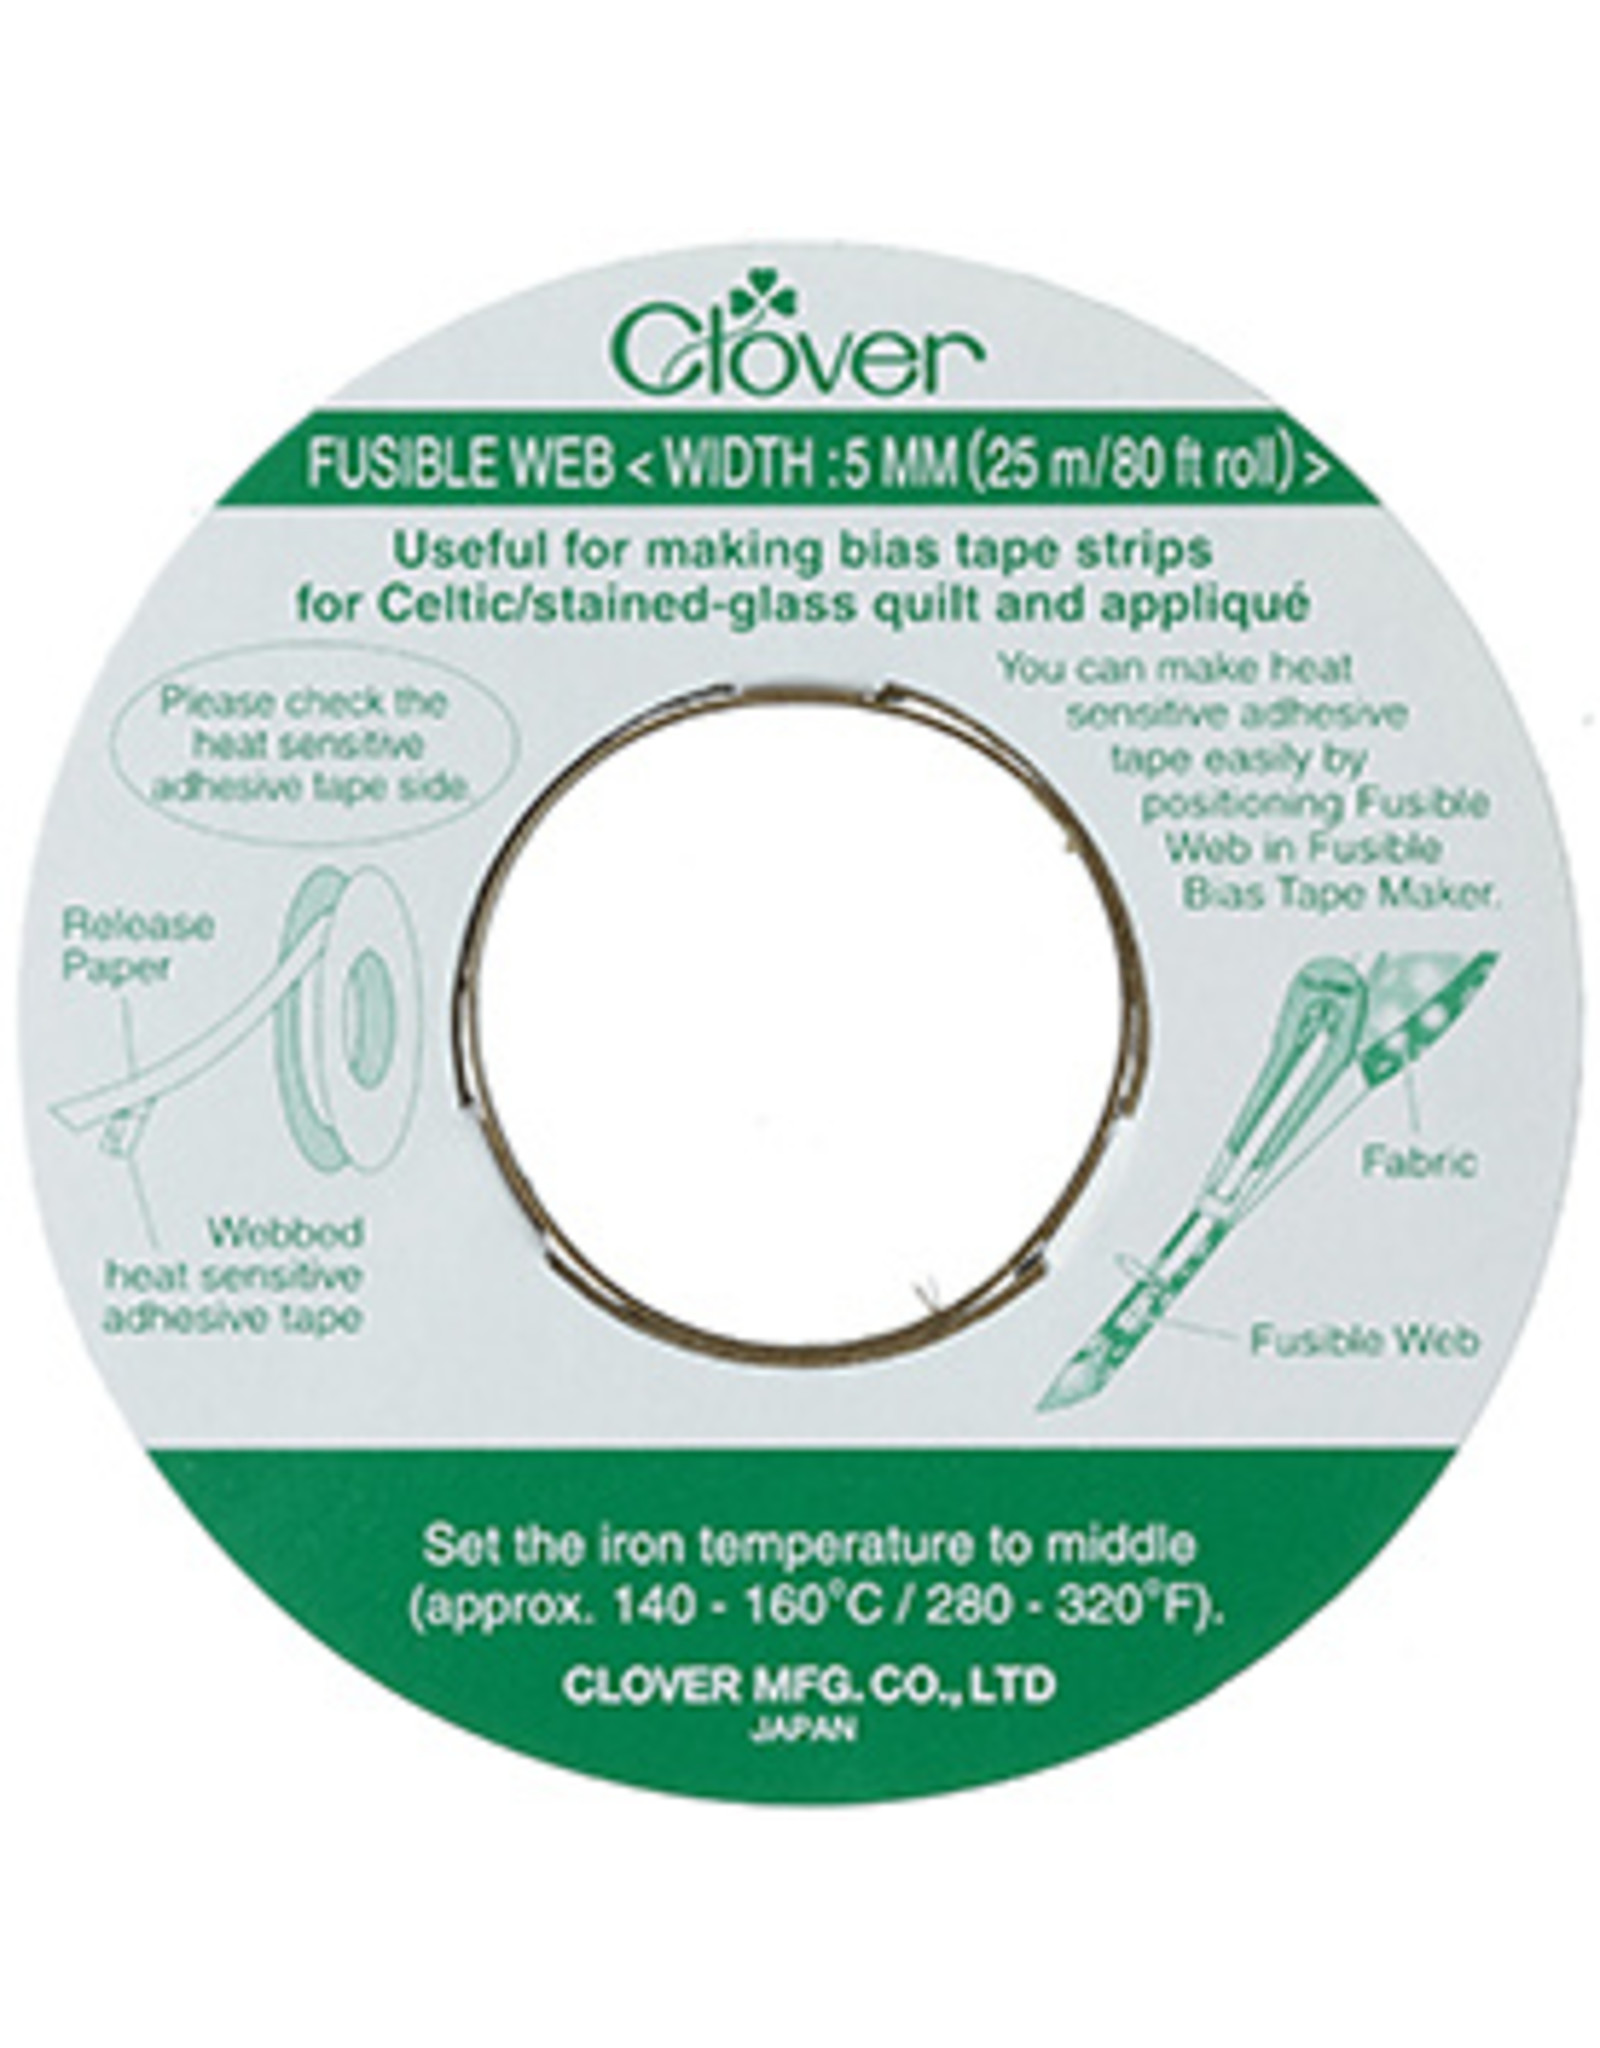 Clover Fusible web - 5 mm - for stained glass quilts